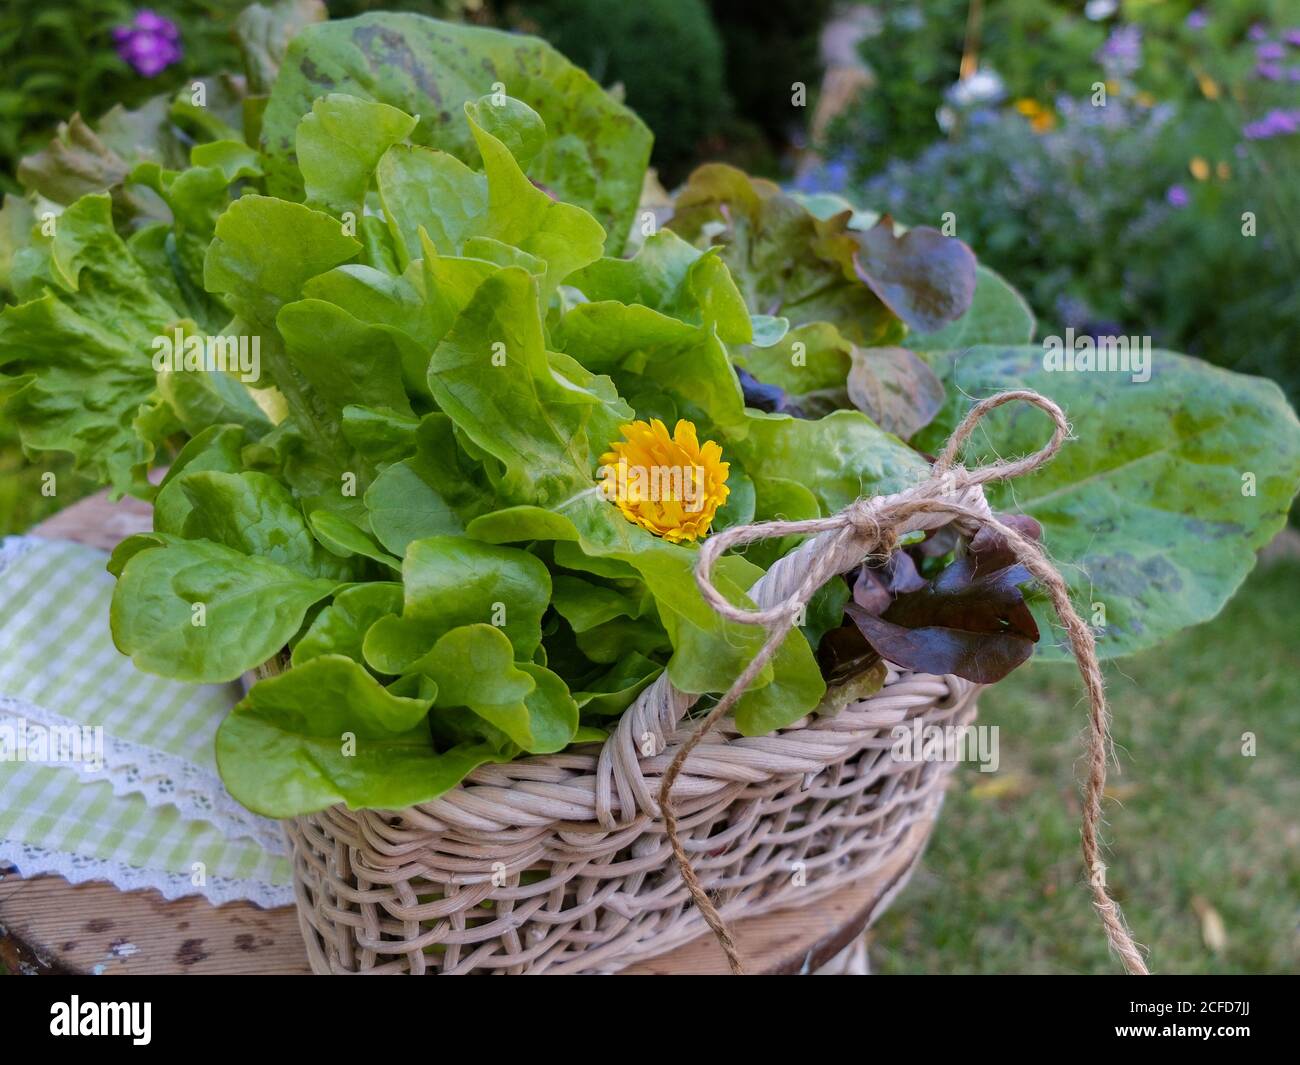 Various freshly picked salads in a decorative basket Stock Photo